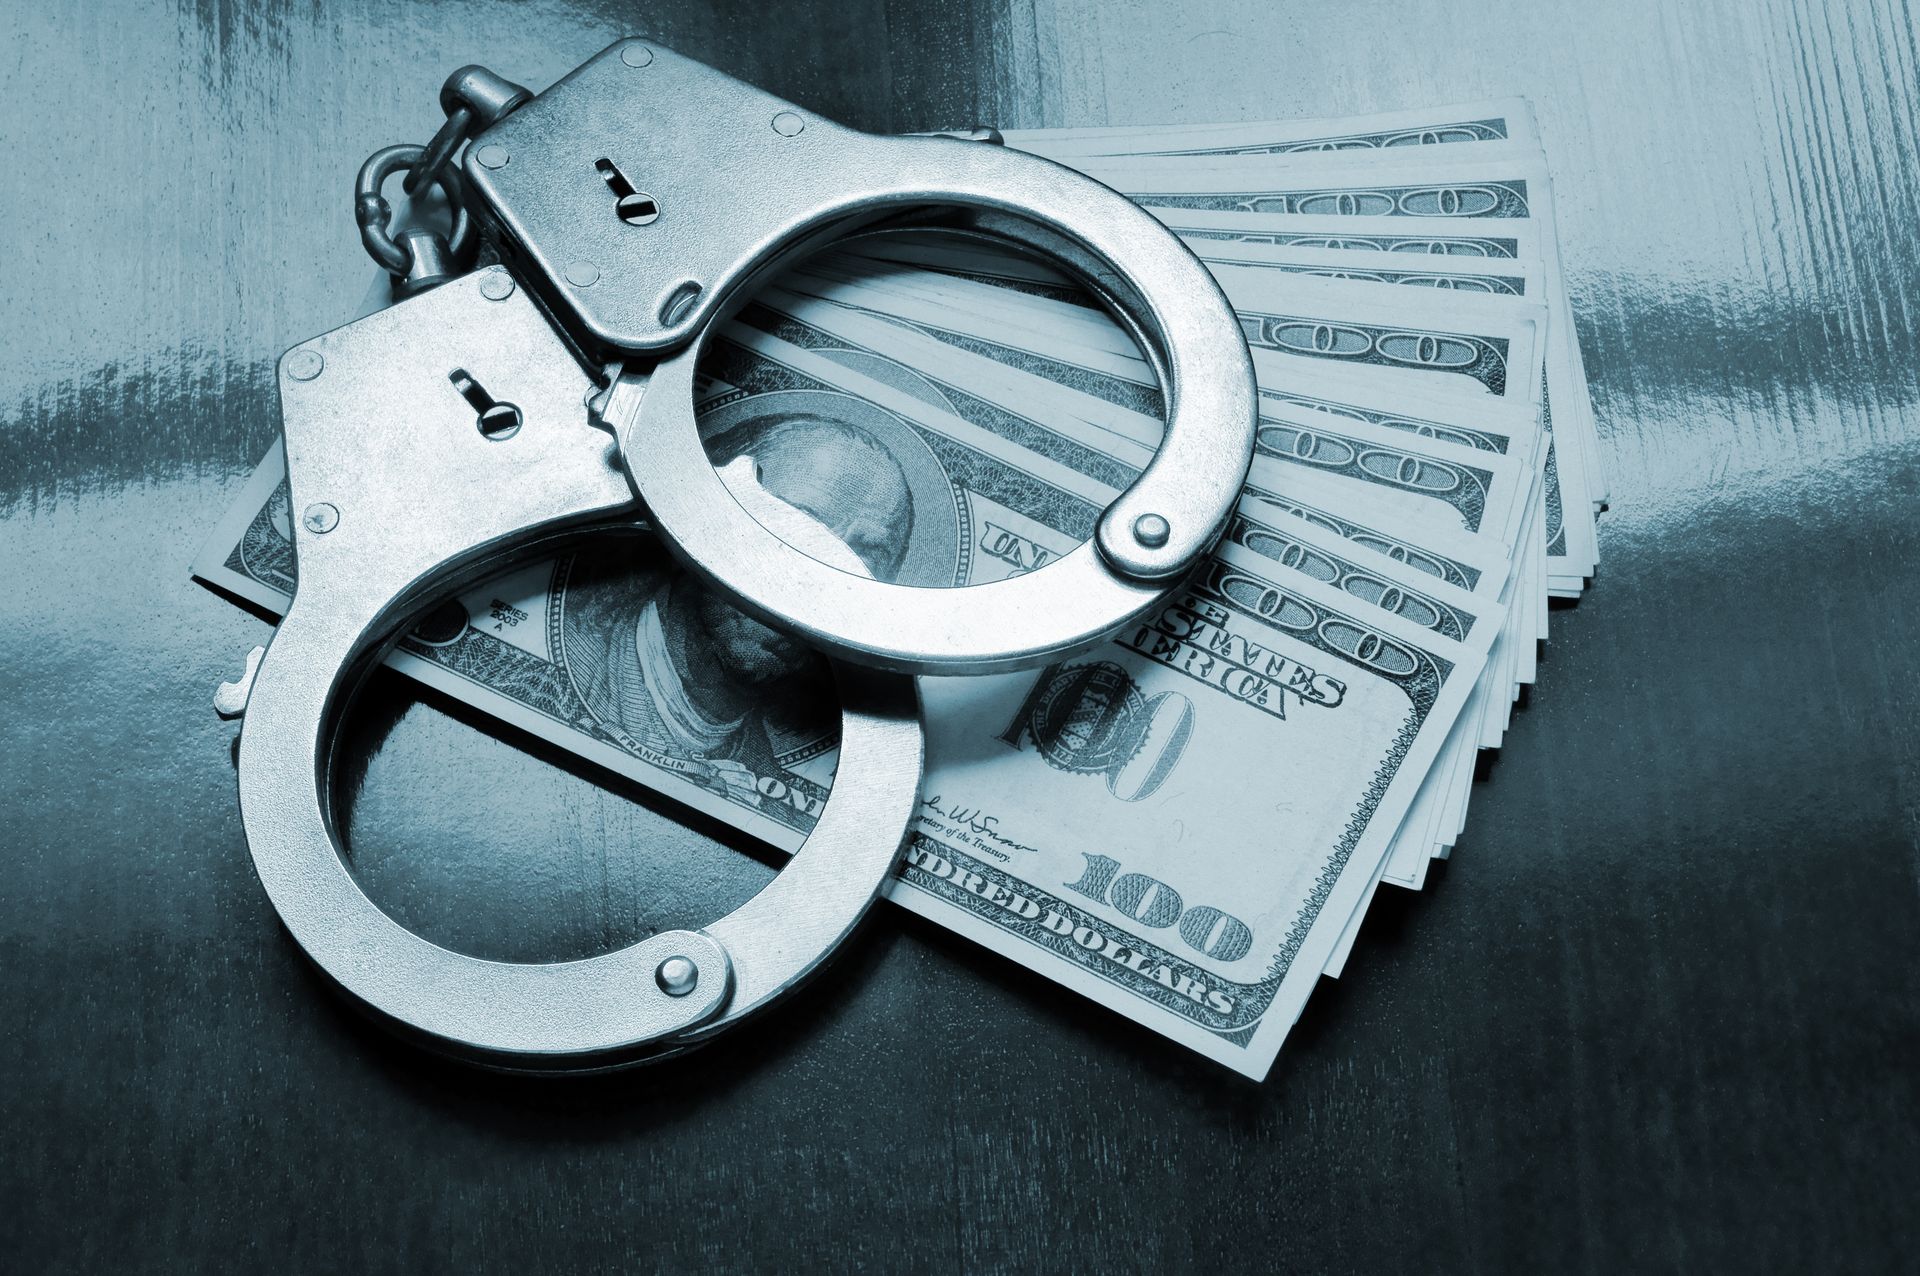 An Image of a set of handcuffs on top of fanned out one hundred dollar bills